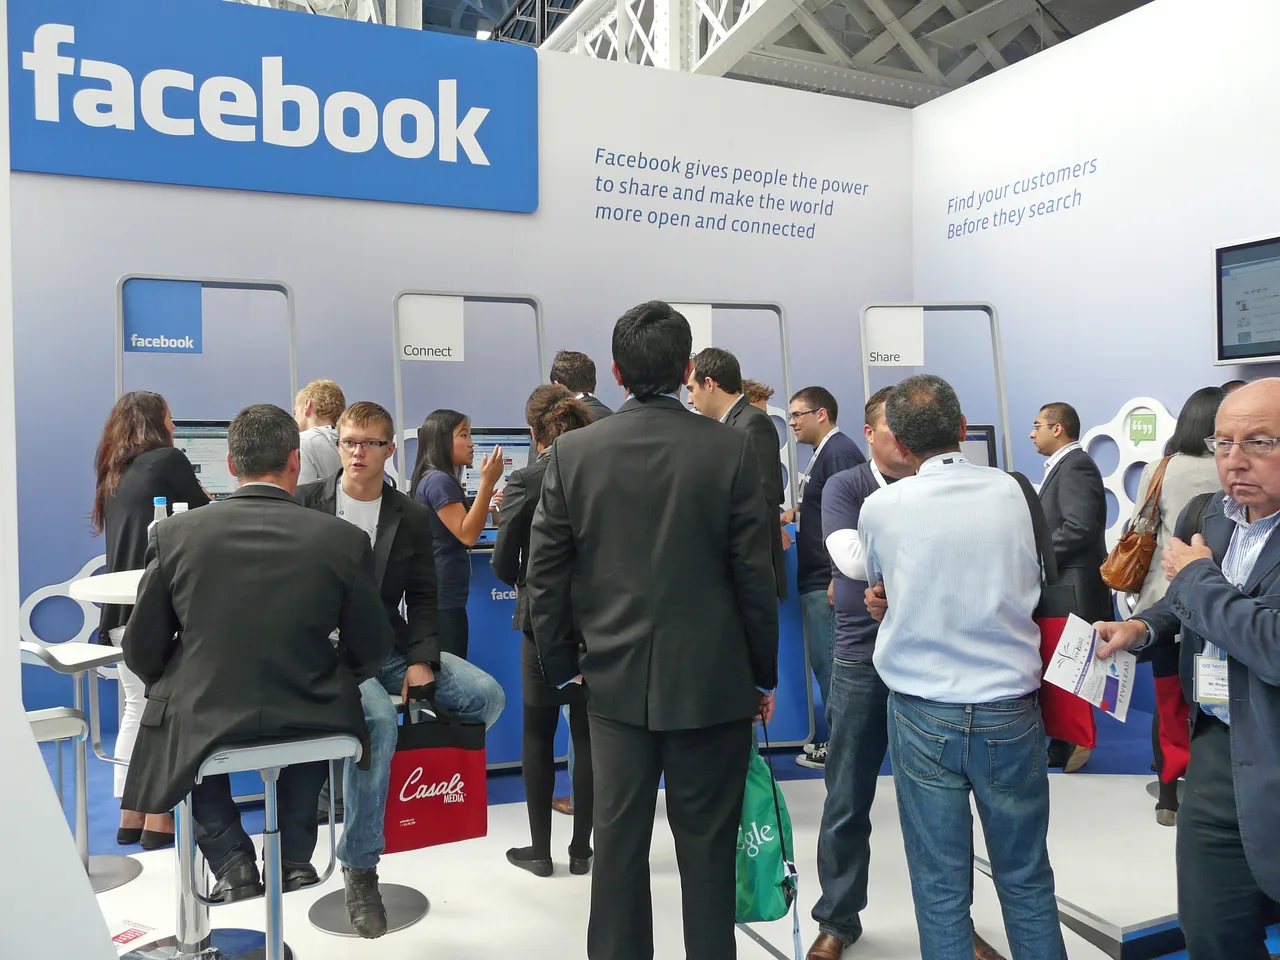 Facebook Launches Beta Version Of Facebook At Work